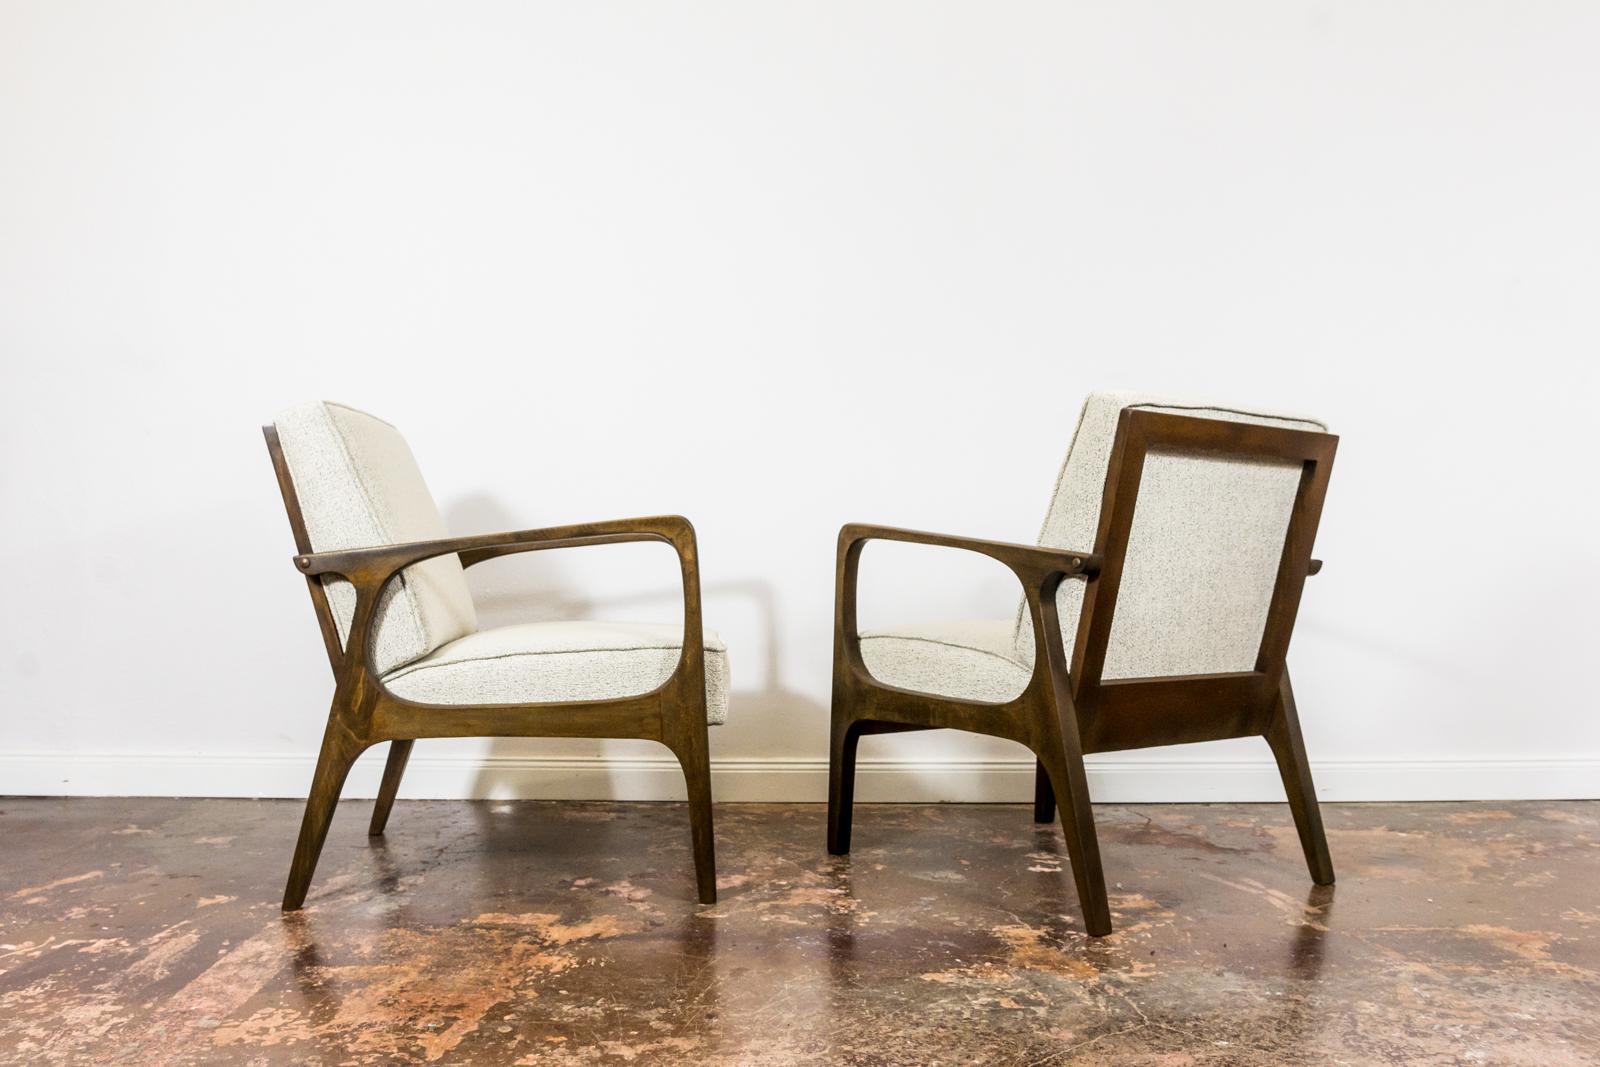 20th Century Pair of Mid-Century Armchairs from Prudnickie Fabryki Mebli 1960's, Poland For Sale